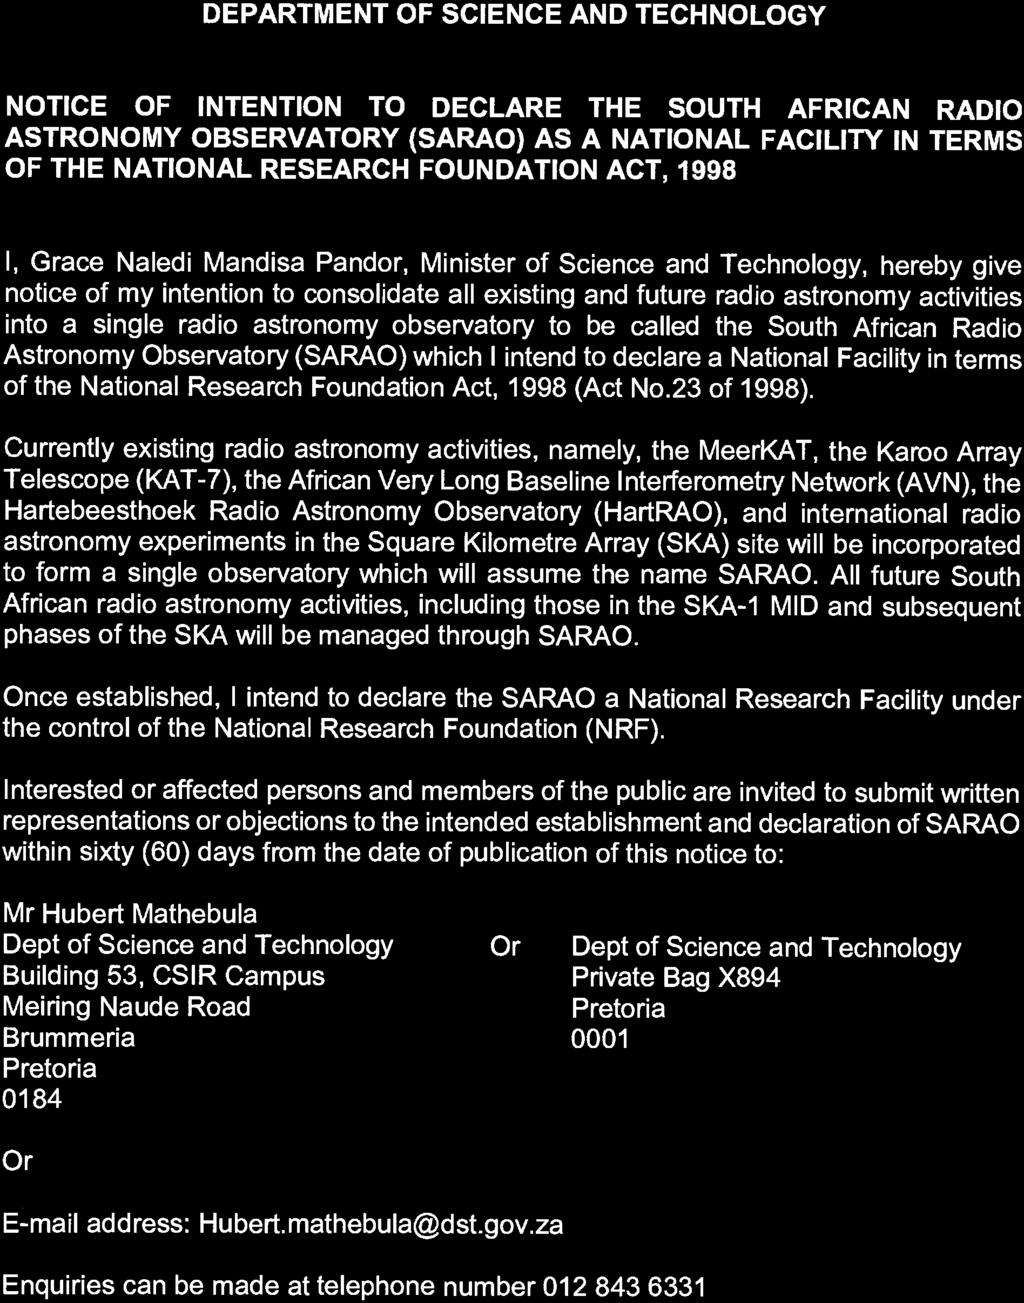 367 21 APRIL 2017 NOTICE OF INTENTION TO DECLARE THE SOUTH AFRICAN RADIO ASTRONOMY OBSERVATORY (SARAO) AS A NATIONAL FACILITY IN TERMS OF THE NATIONAL RESEARCH FOUNDATION ACT, 1998 I, Grace Naledi